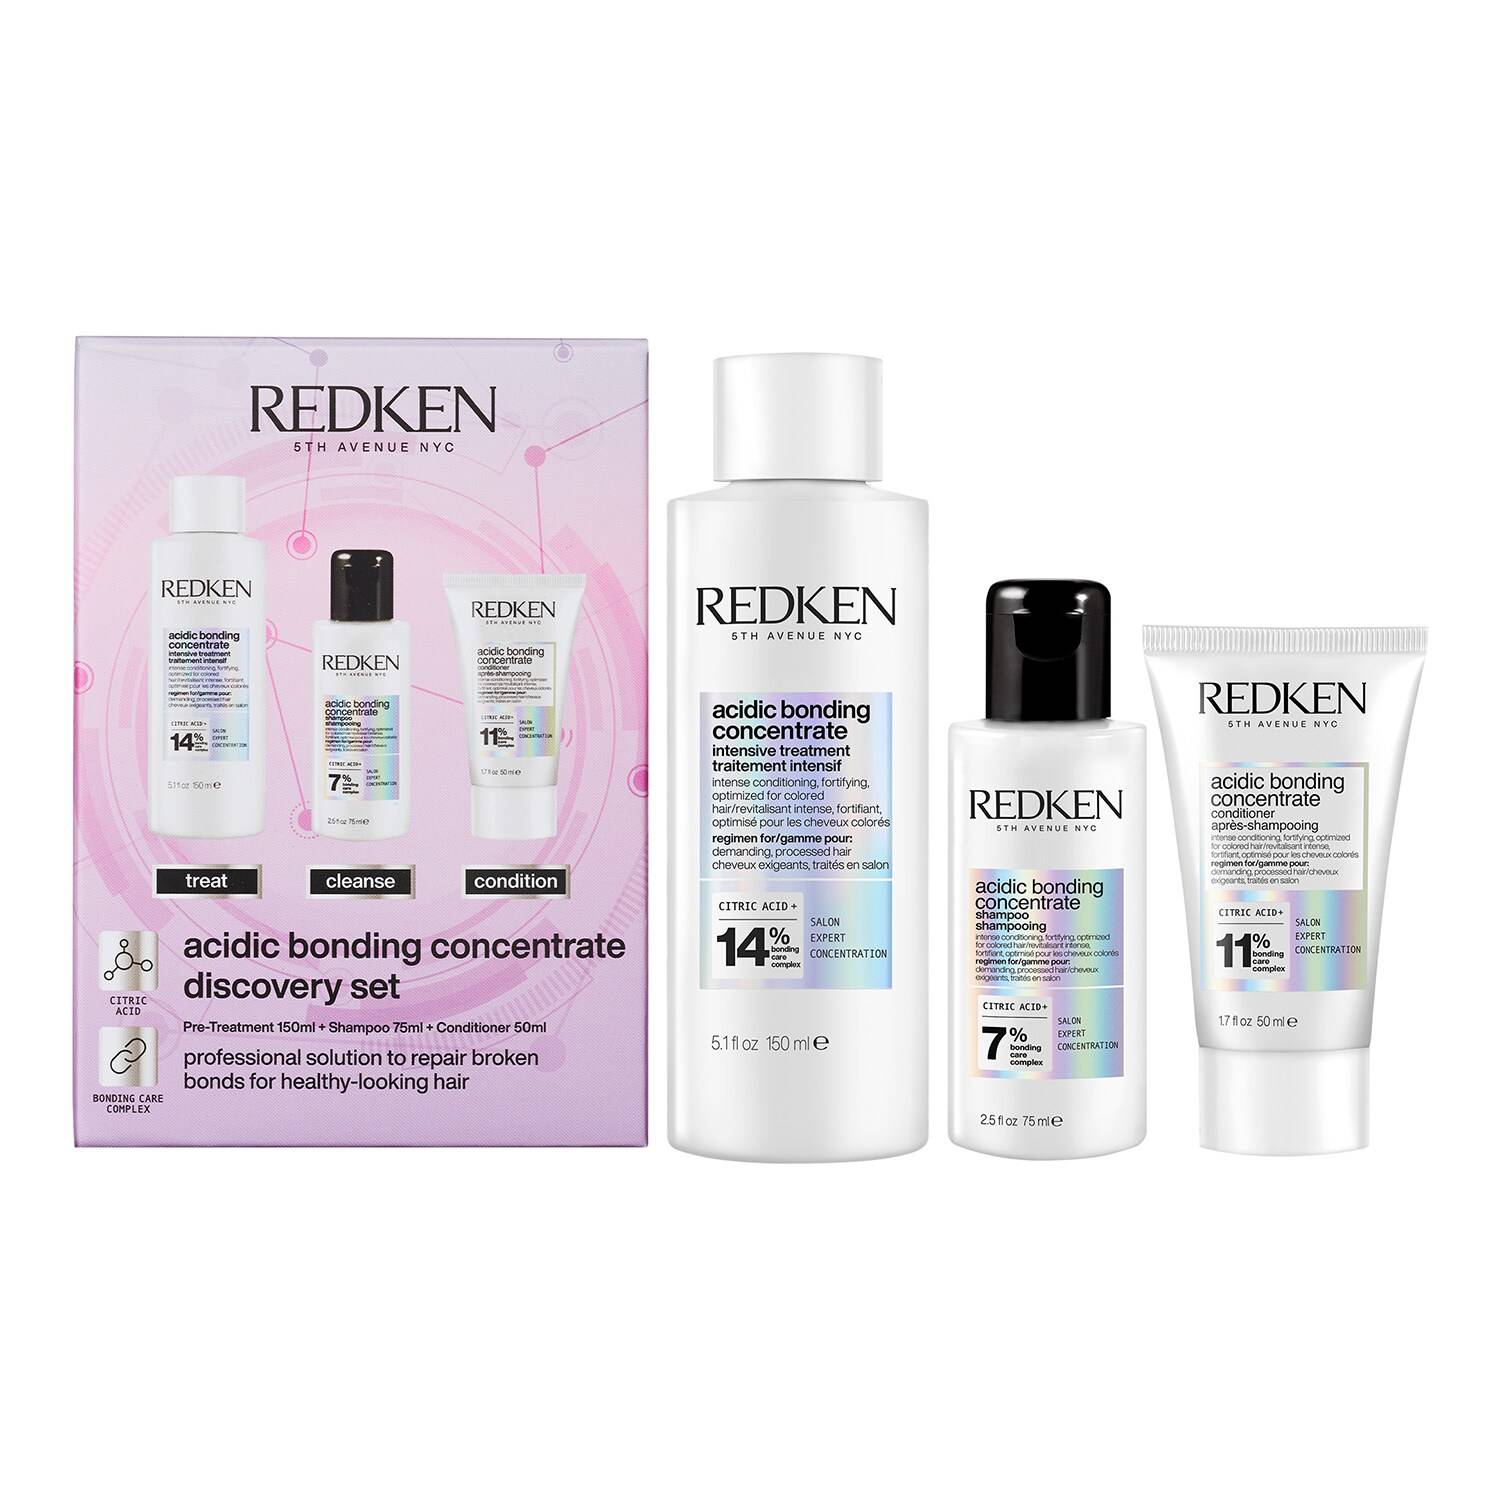 Redken Acidic Bonding Concentrate Discovery Set